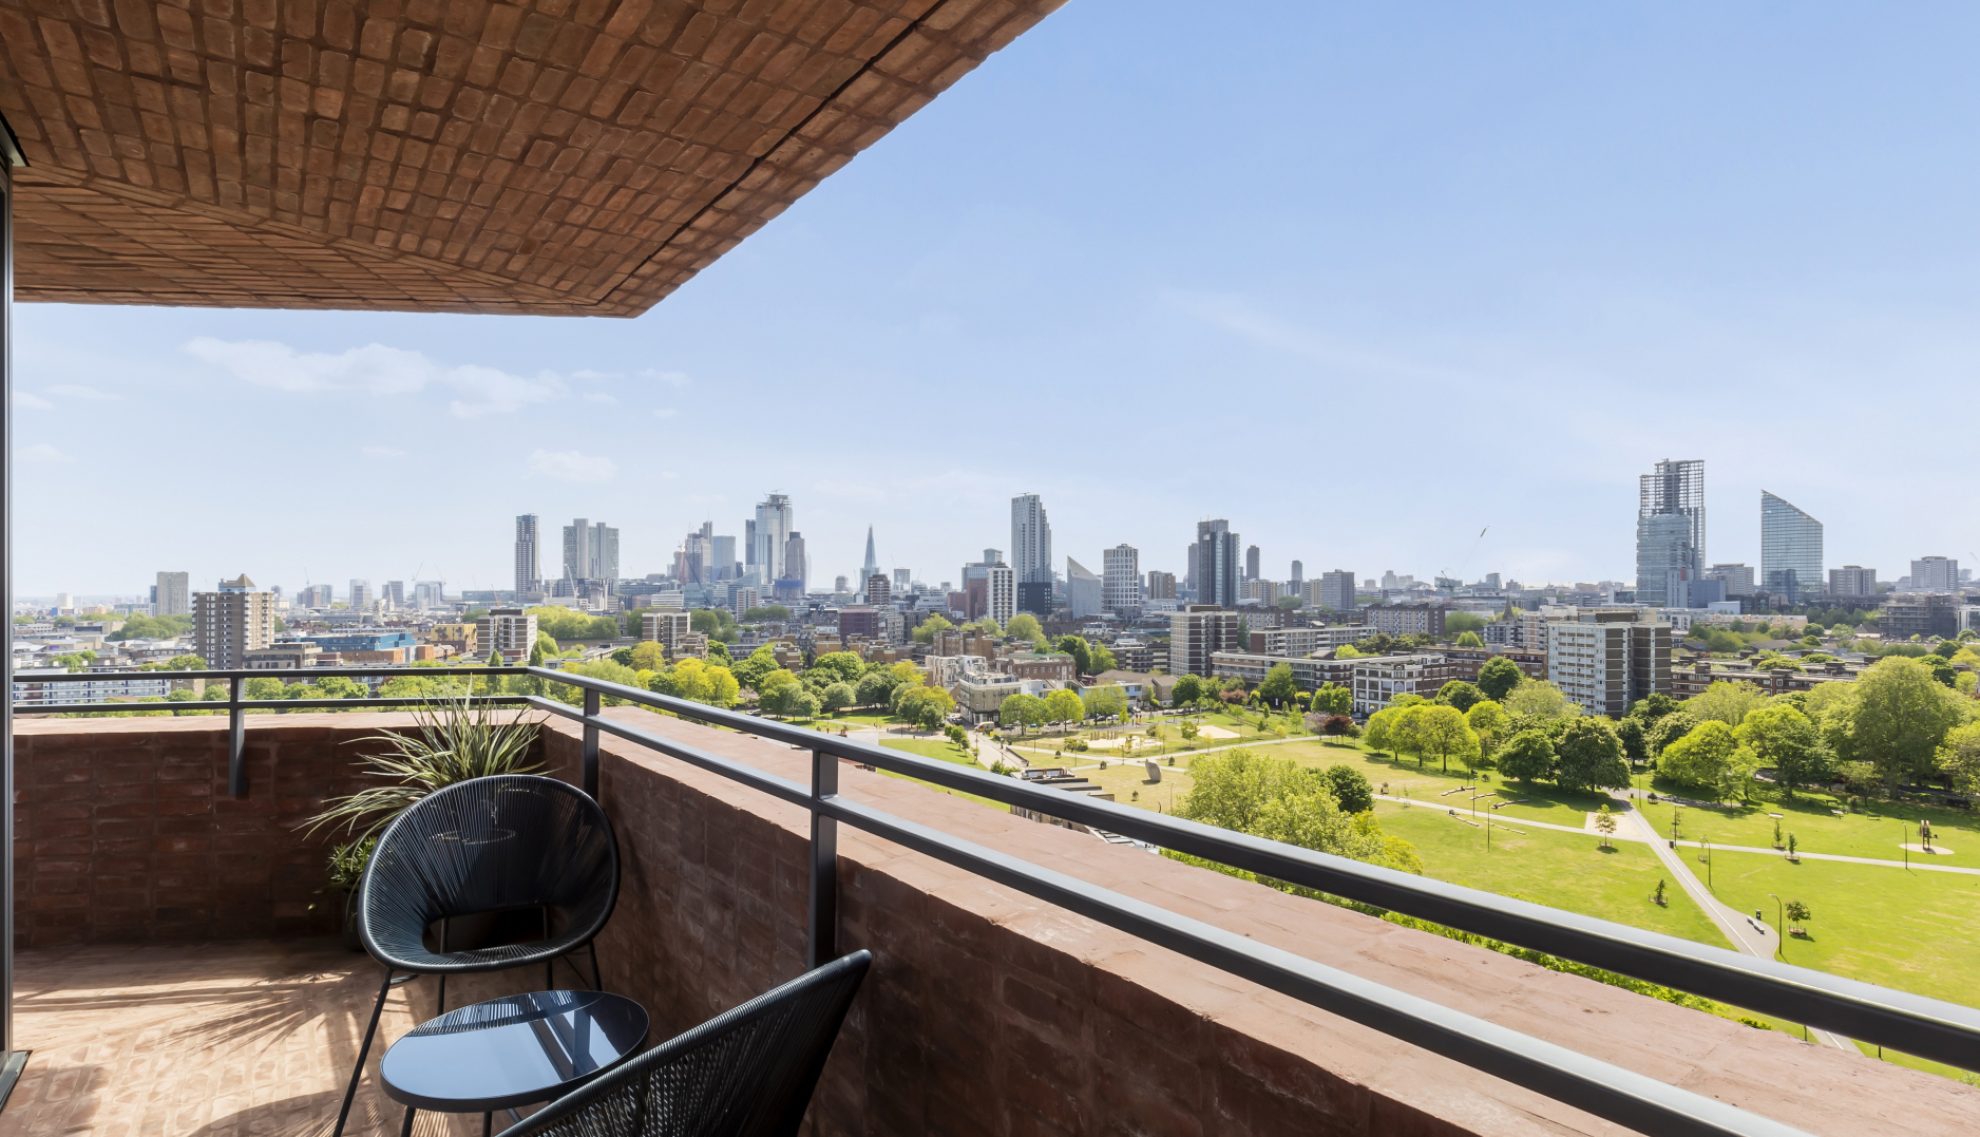 View over North London from the balcony of an apartment in the Hoxton Press development